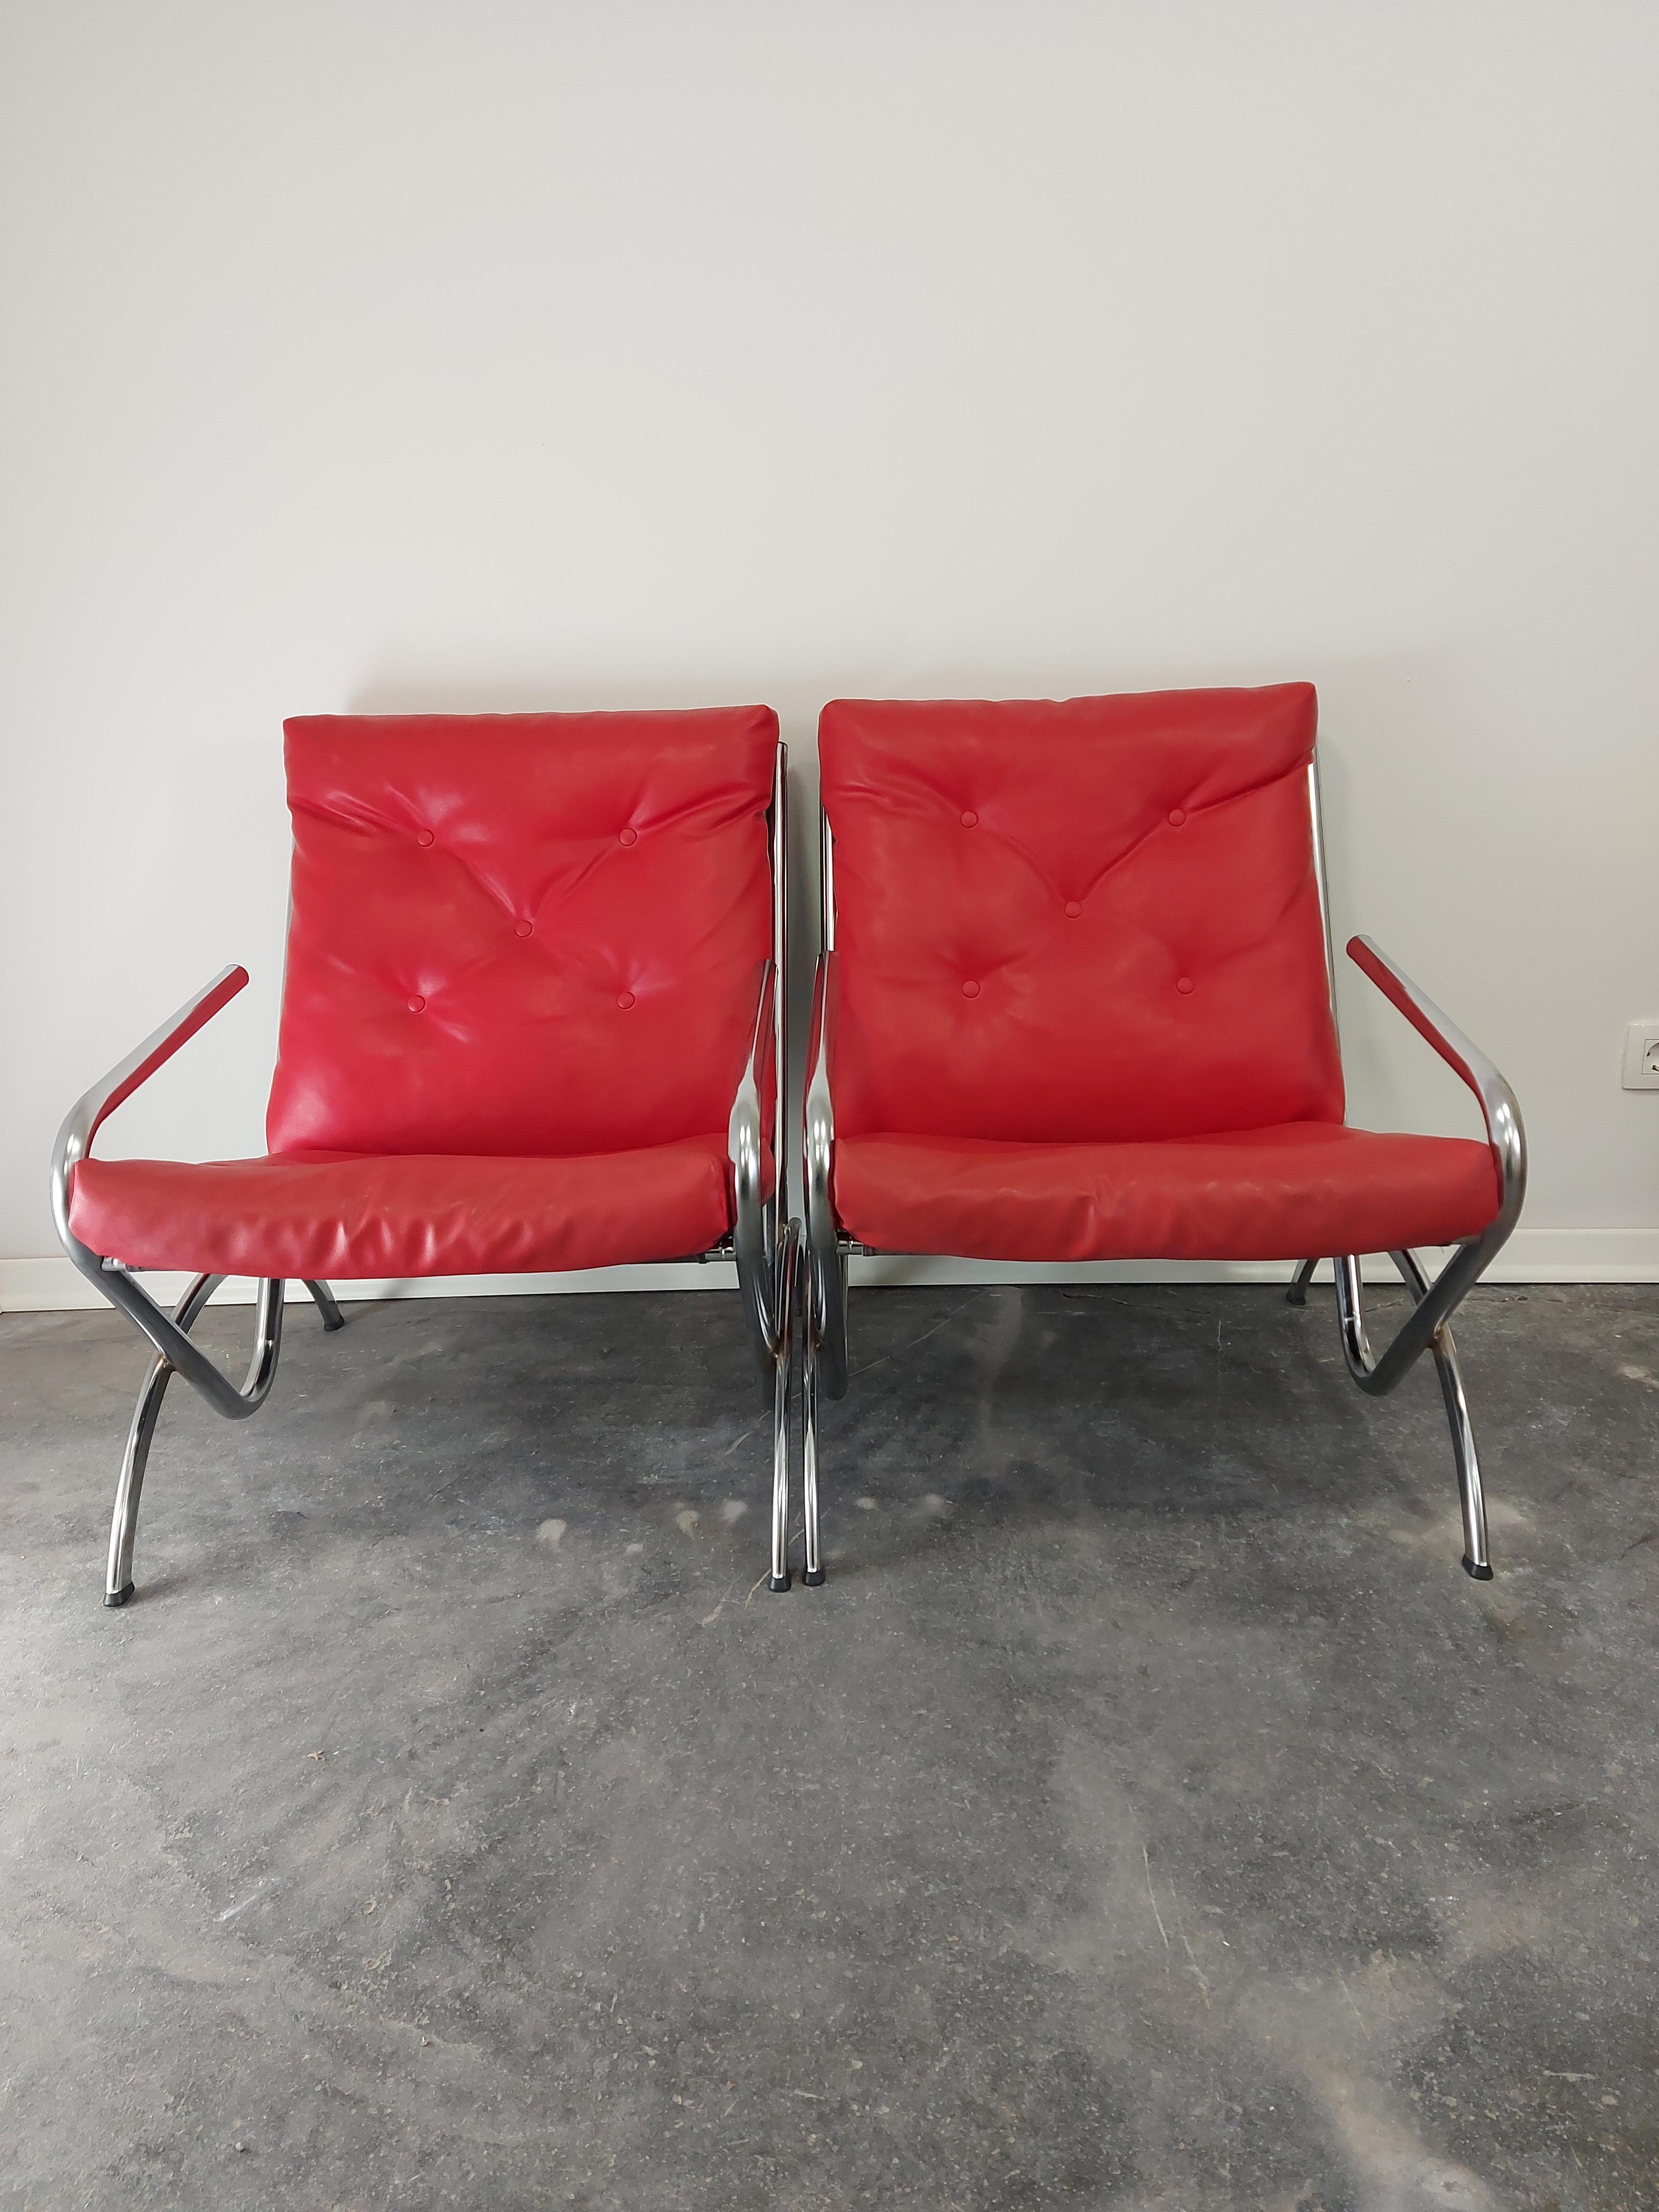 Vintage lounge chair (really rare find and really comfortable chairs)
Period: 1980/1990s
Material: chrome, leather, leather
Condition: very good vintage condition, some signs of use, undamaged
Dimensions: H = 76 cm, D = 75 cm, W = 60 cm, seat H